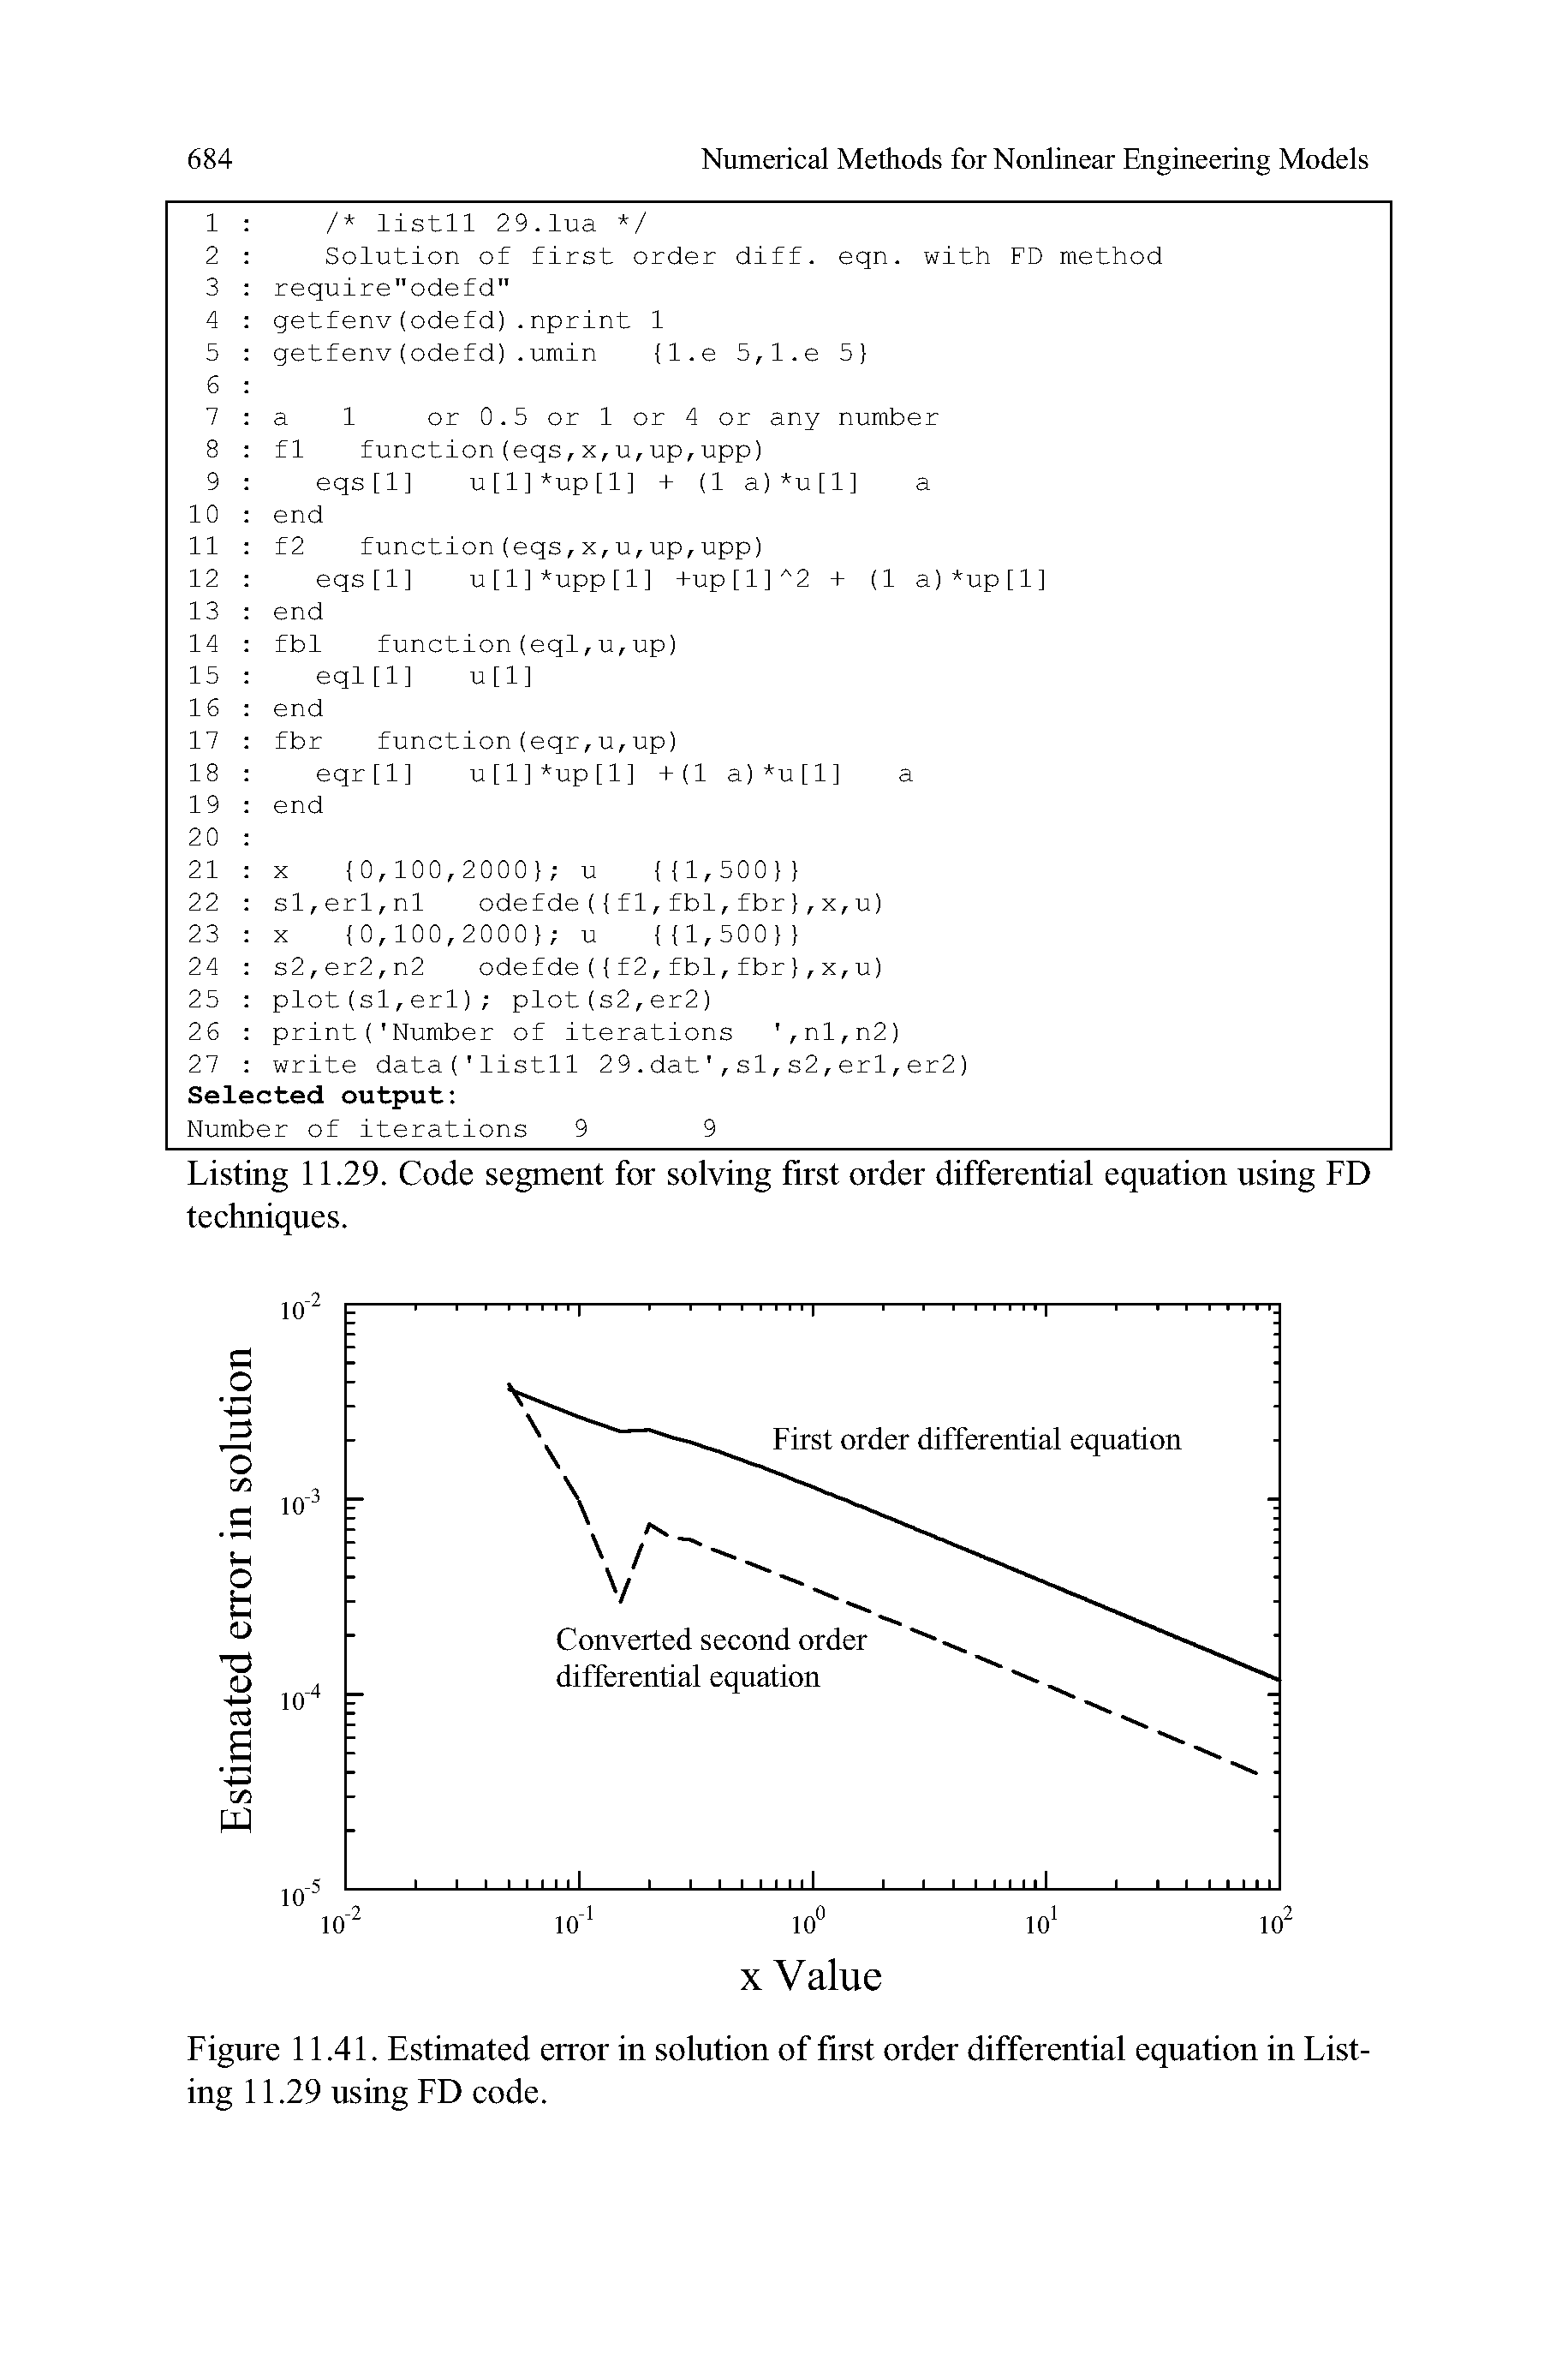 Figure 11.41. Estimated error in solution of first order differential equation in Listing 11.29 using FD eode.